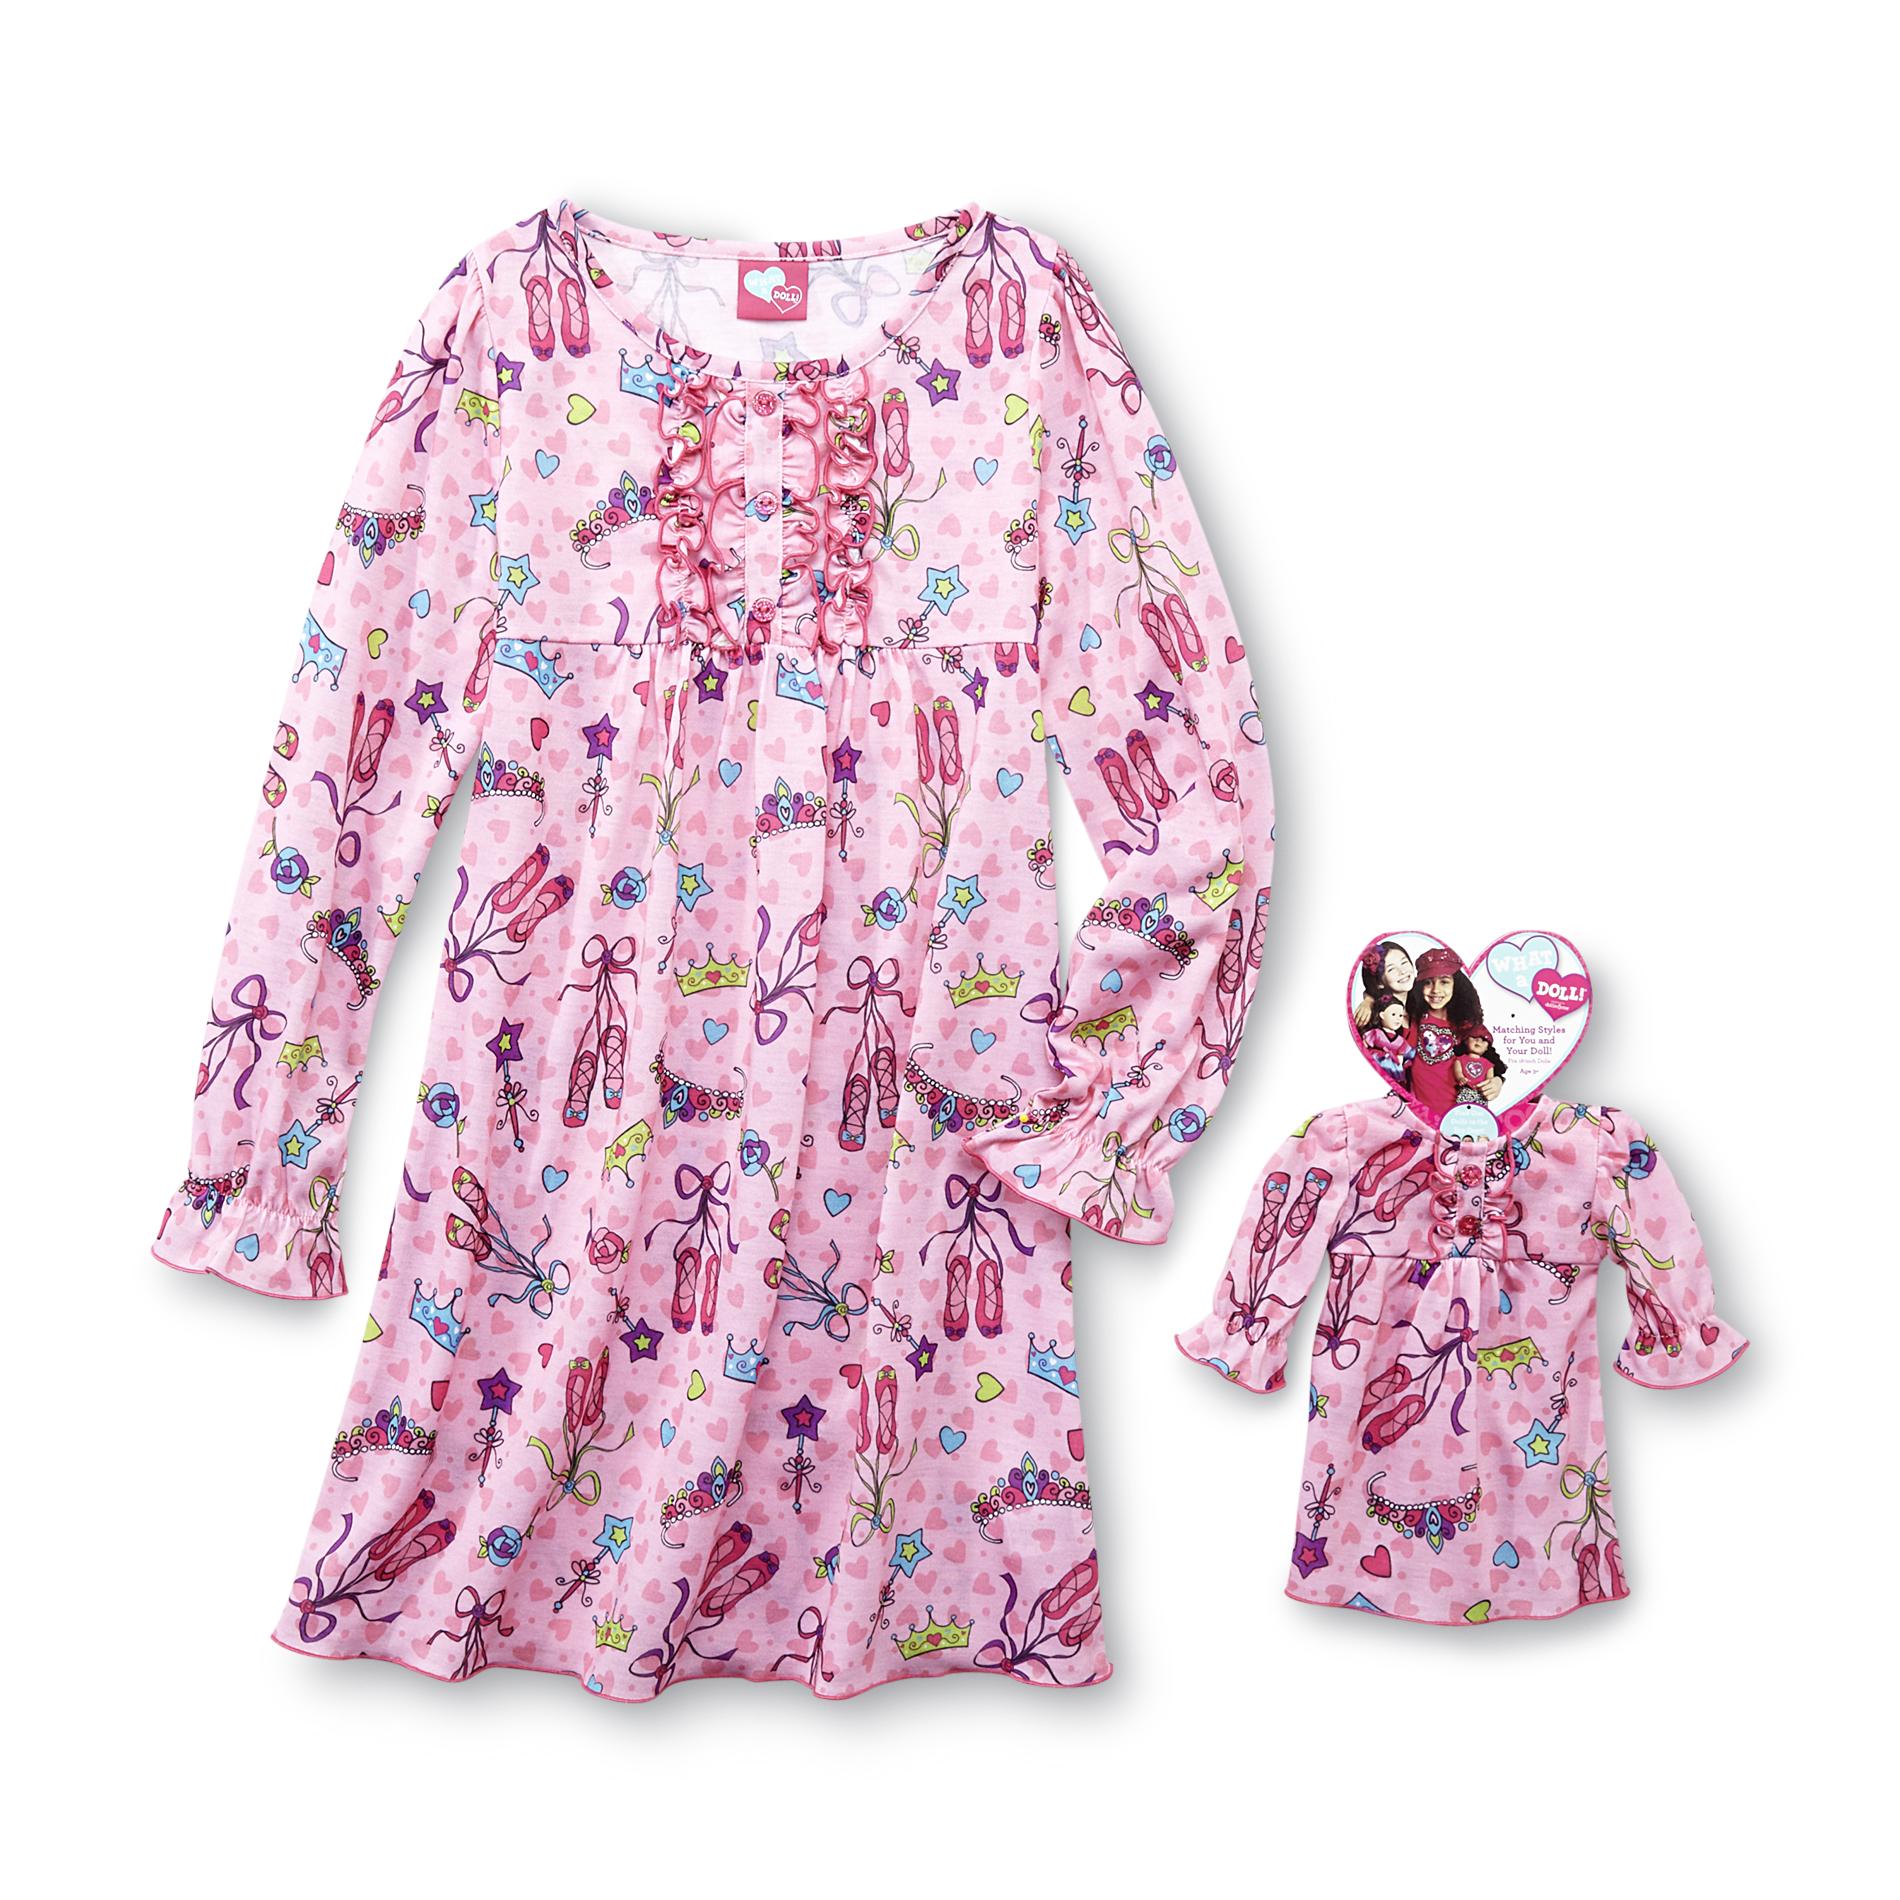 What A Doll Girl's Nightgown & Doll Dress - Ballerina Print